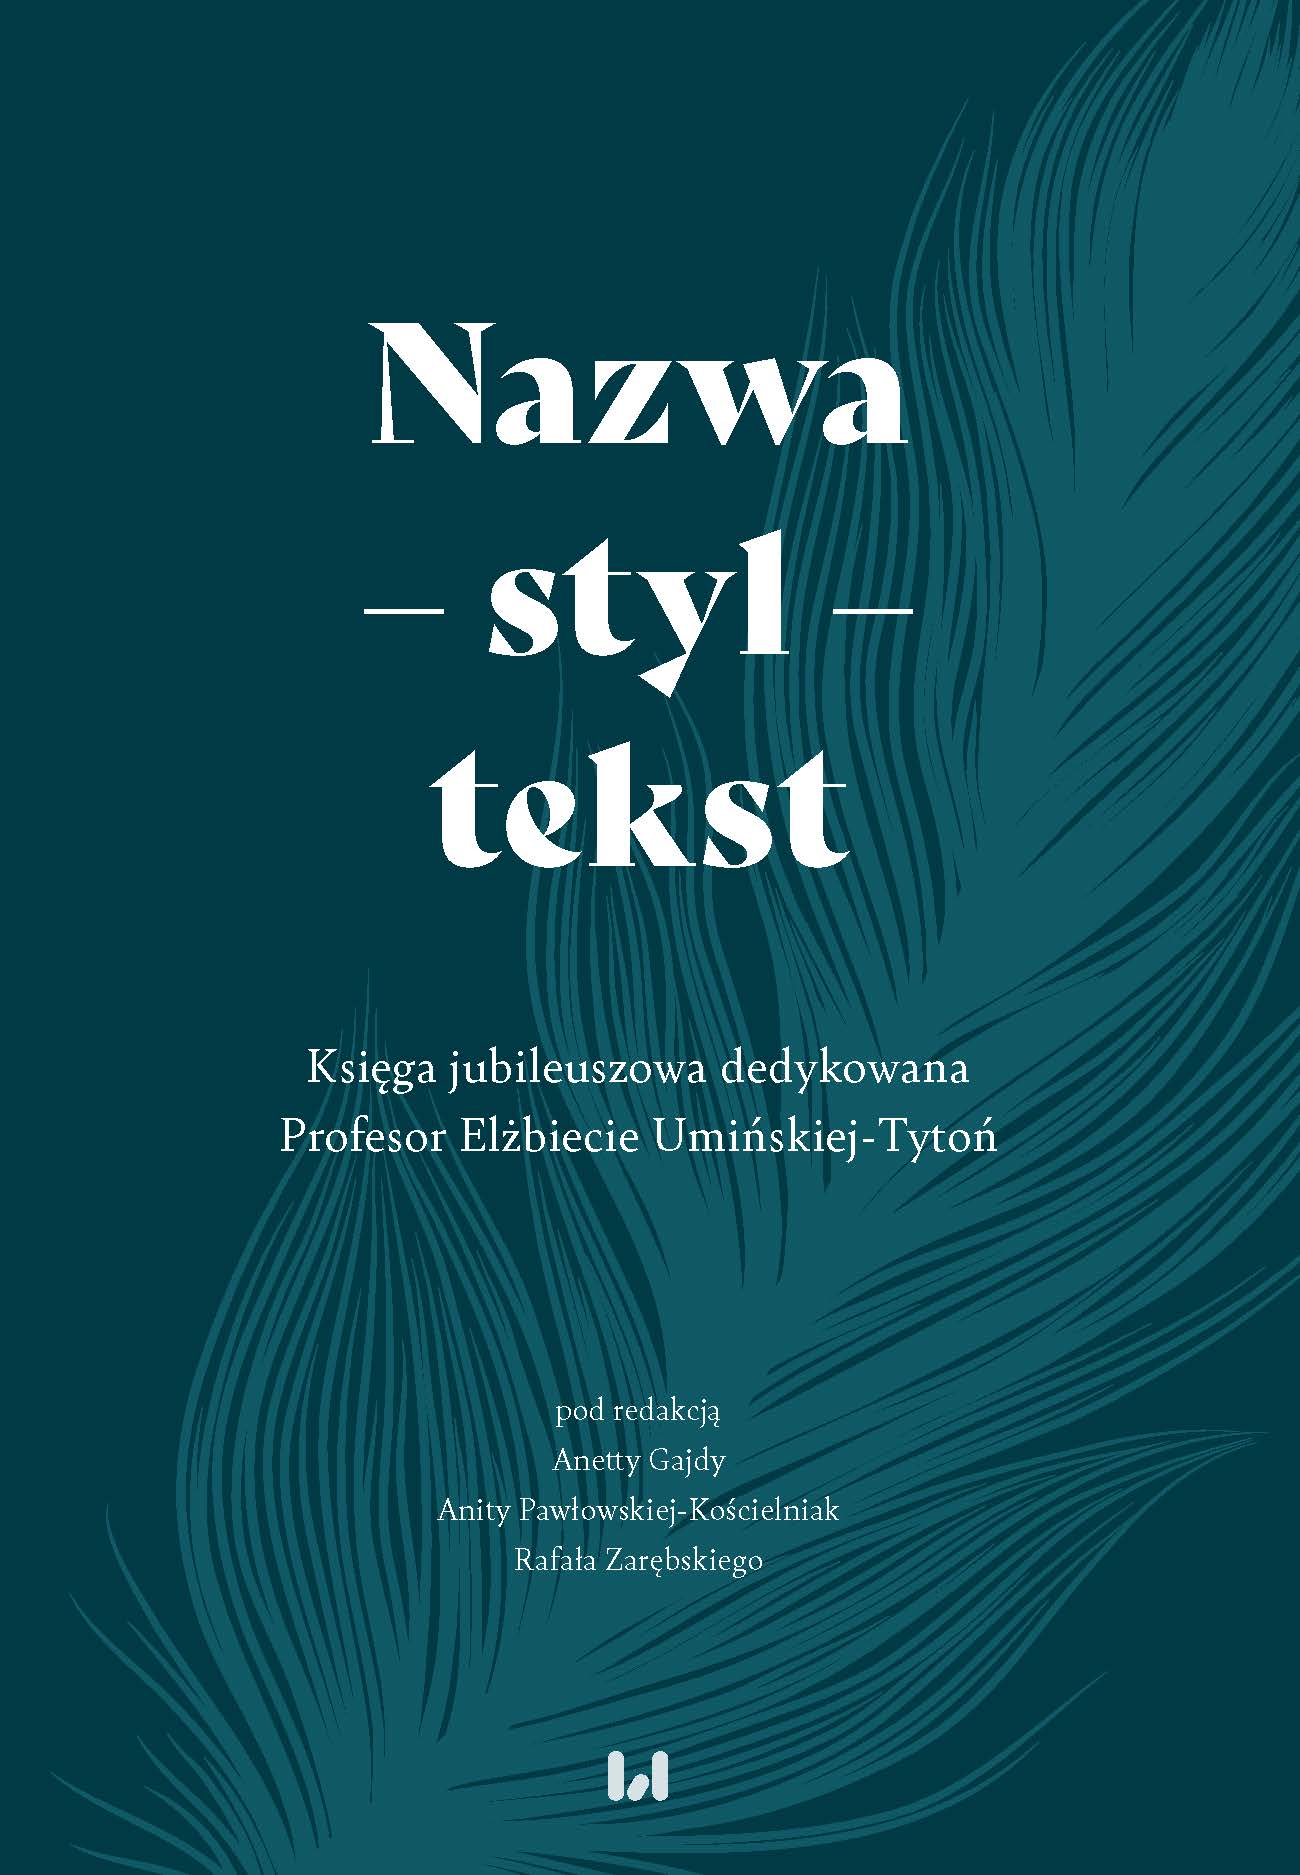 In defense of [the word] niewiasta Cover Image